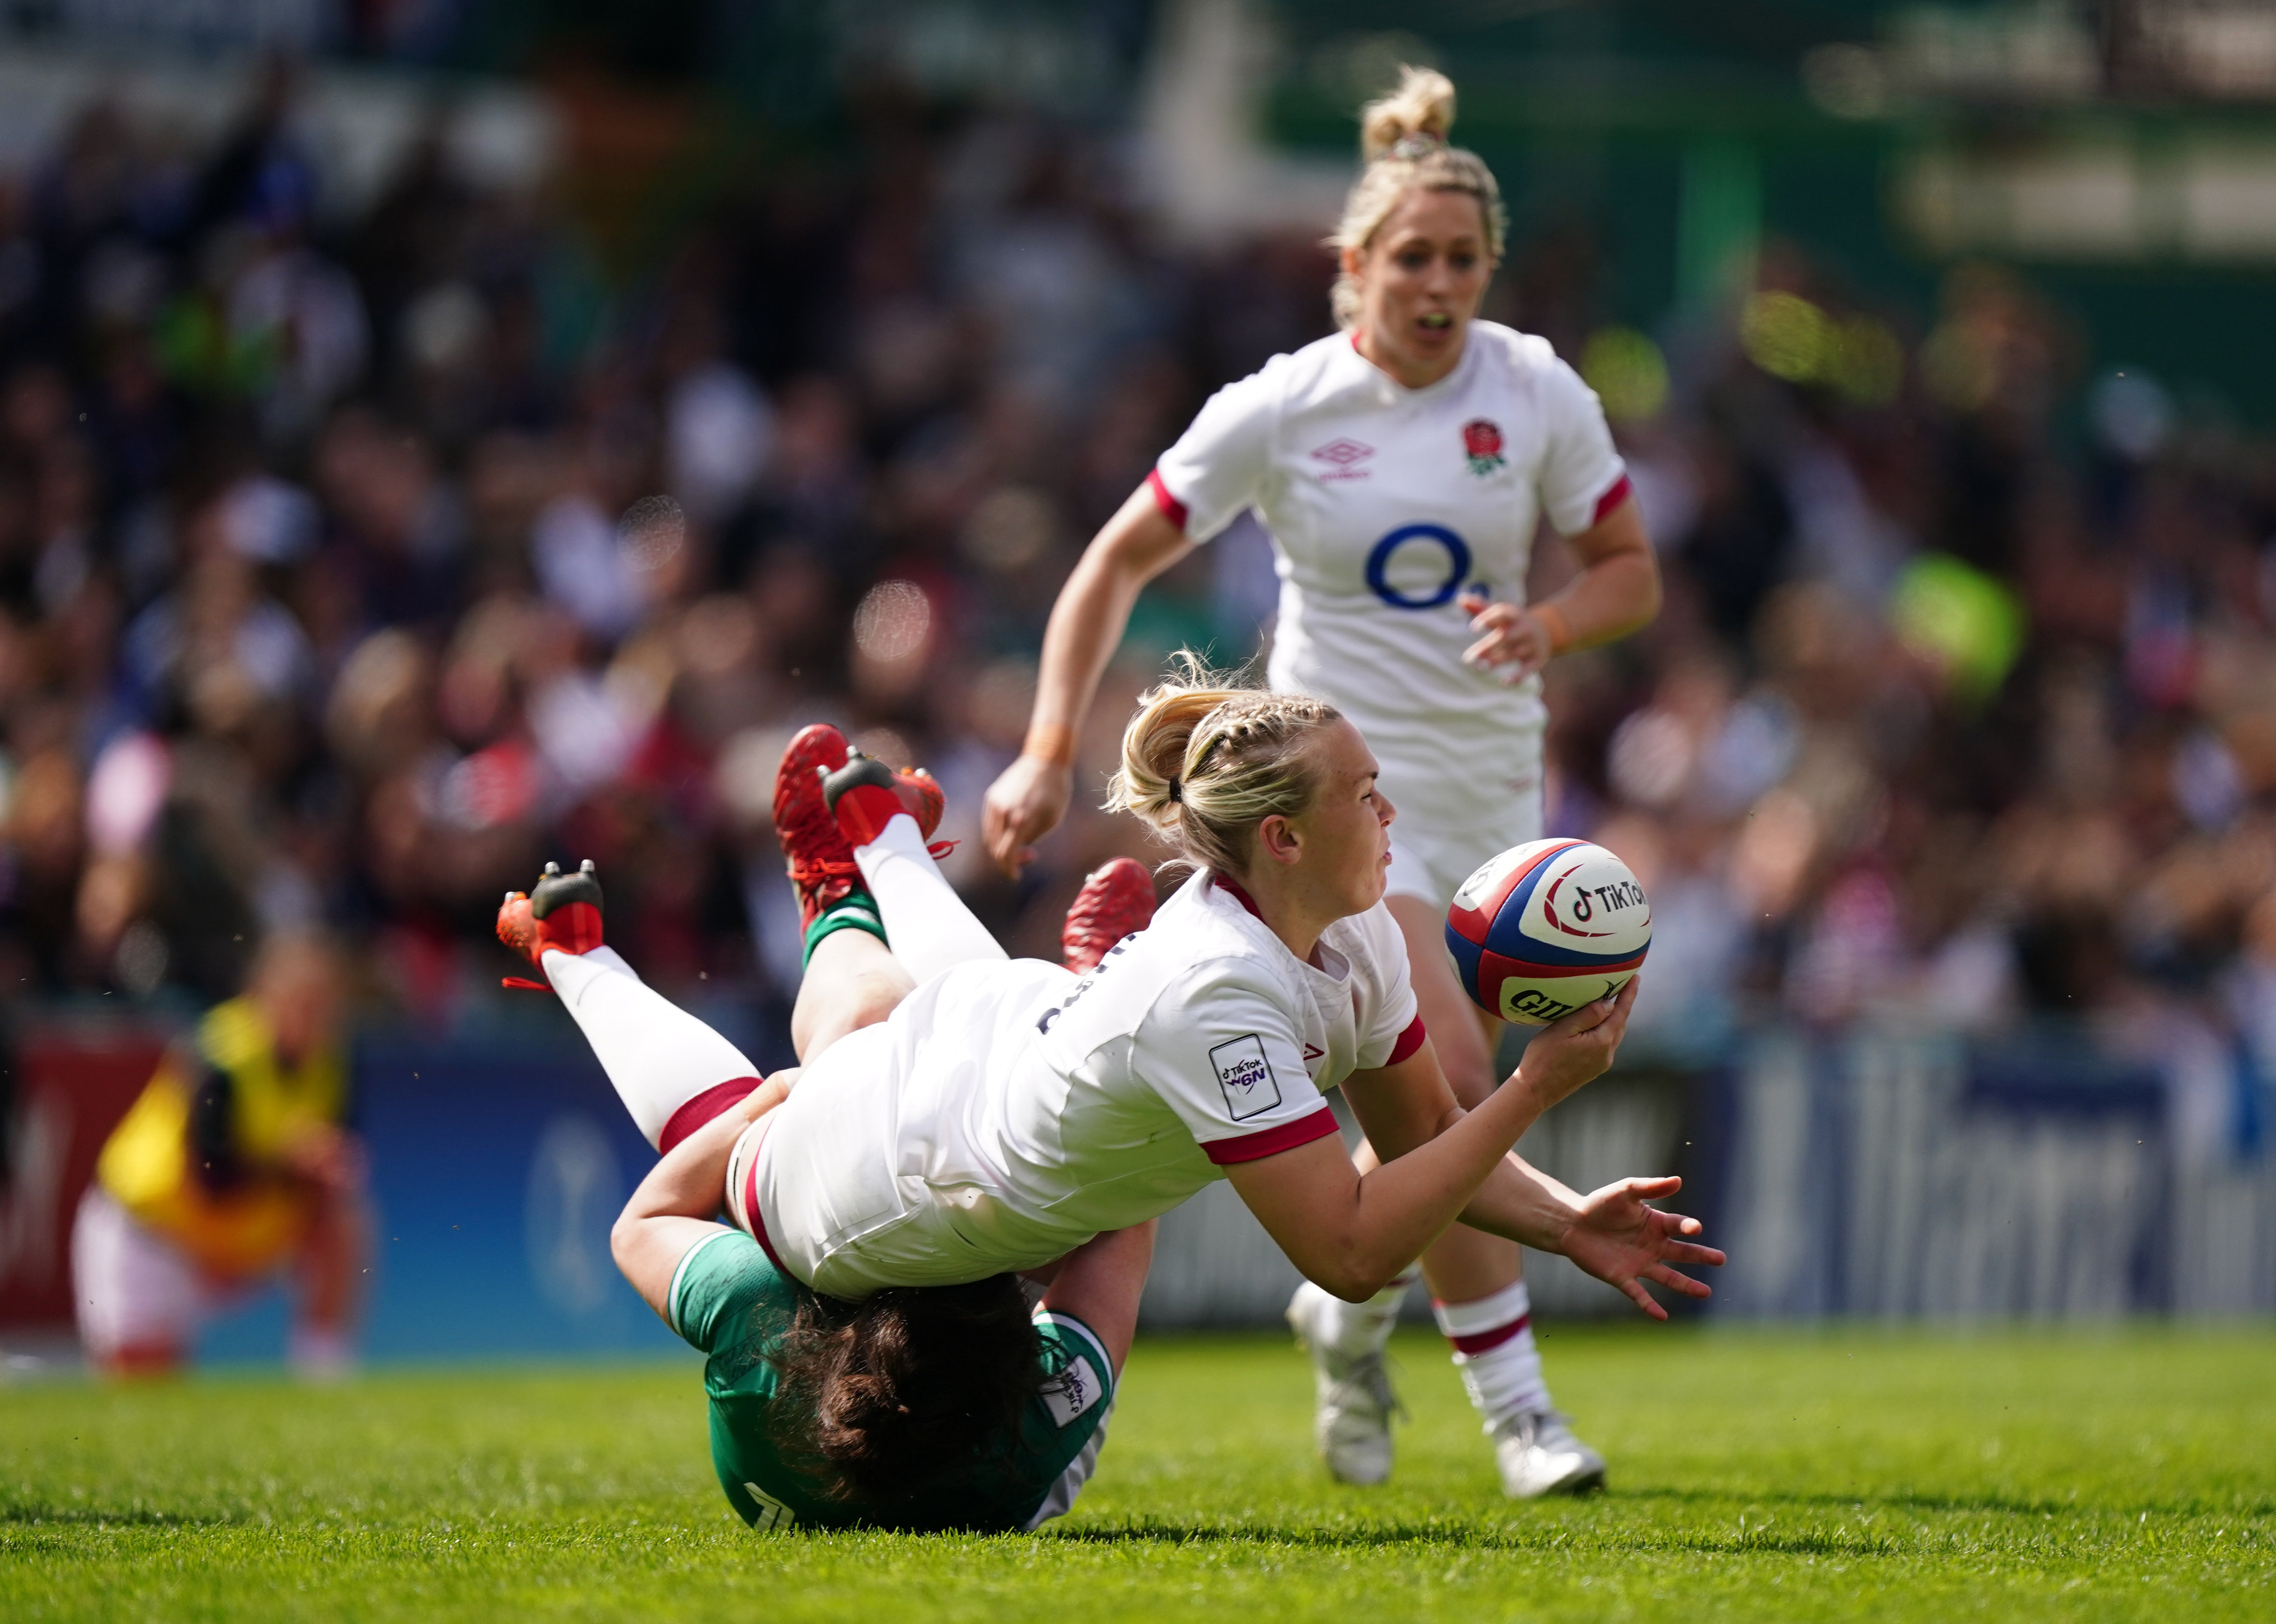 England’s Rosie Galligan tackled by Ireland’s Katie O’Dwyer during the TikTok Women’s Six Nations match at Welford Road (Mike Egerton/PA)